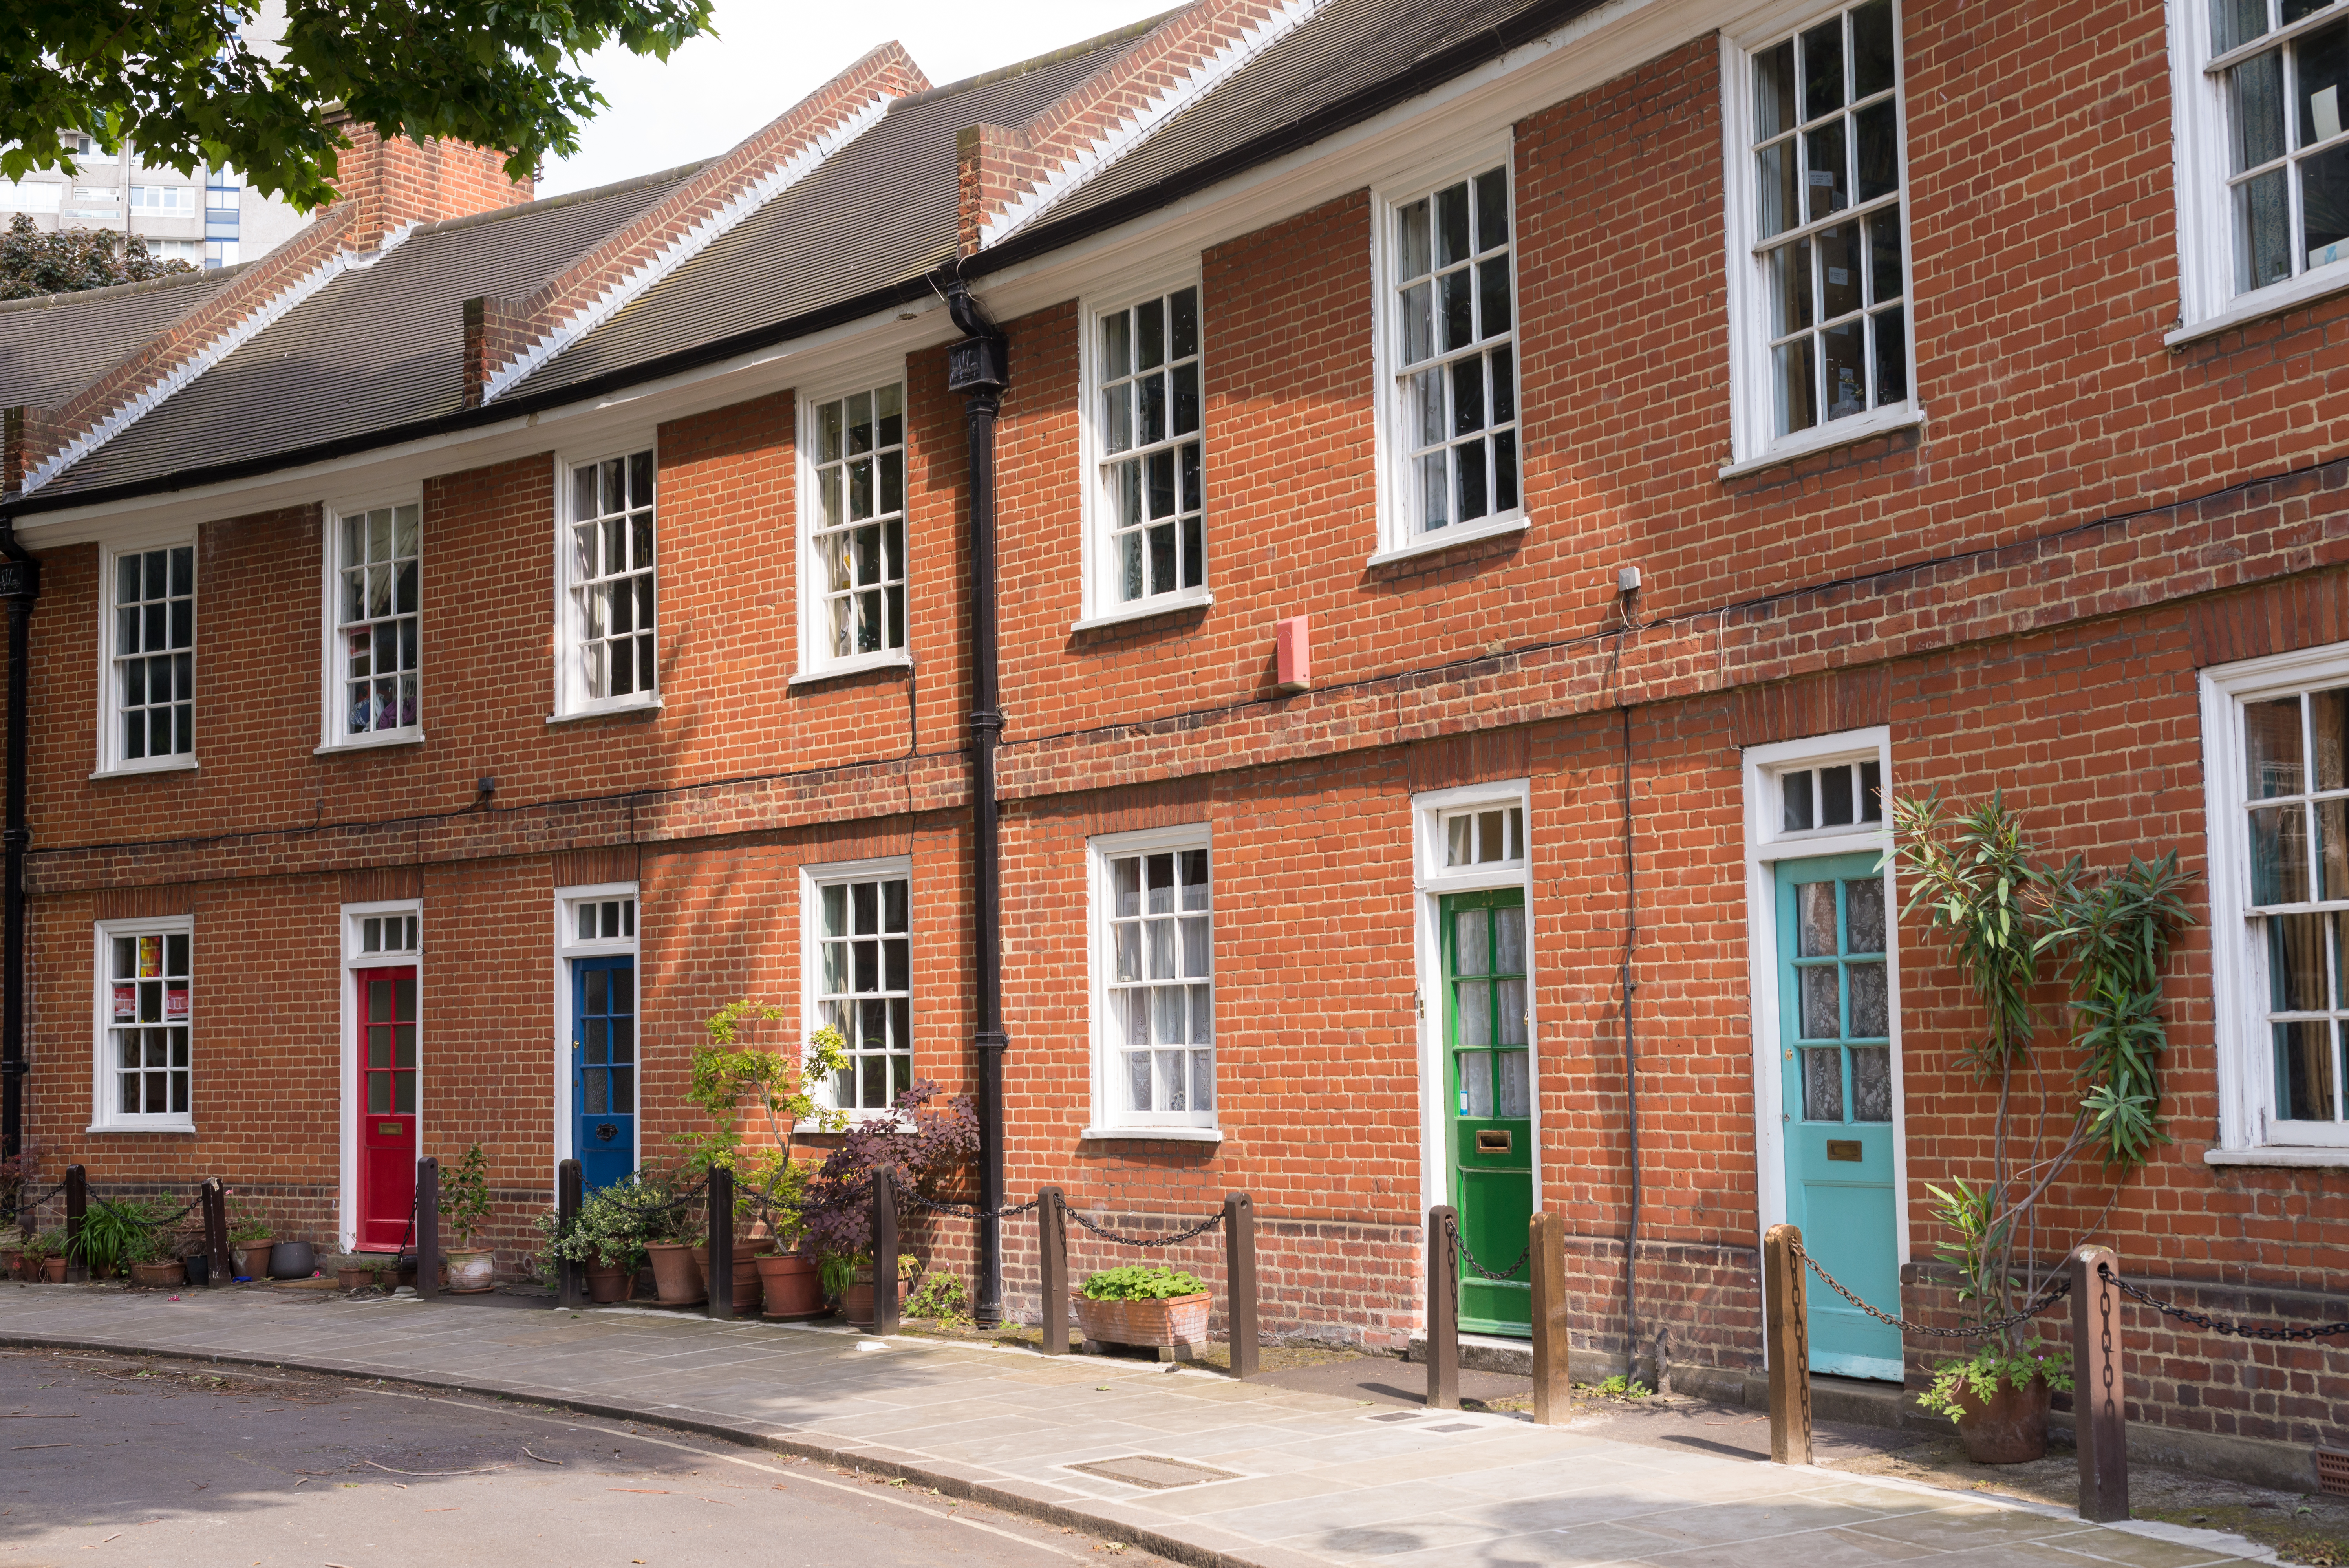 Restored Victorian red brick houses with colored doors on a local road in London, UK